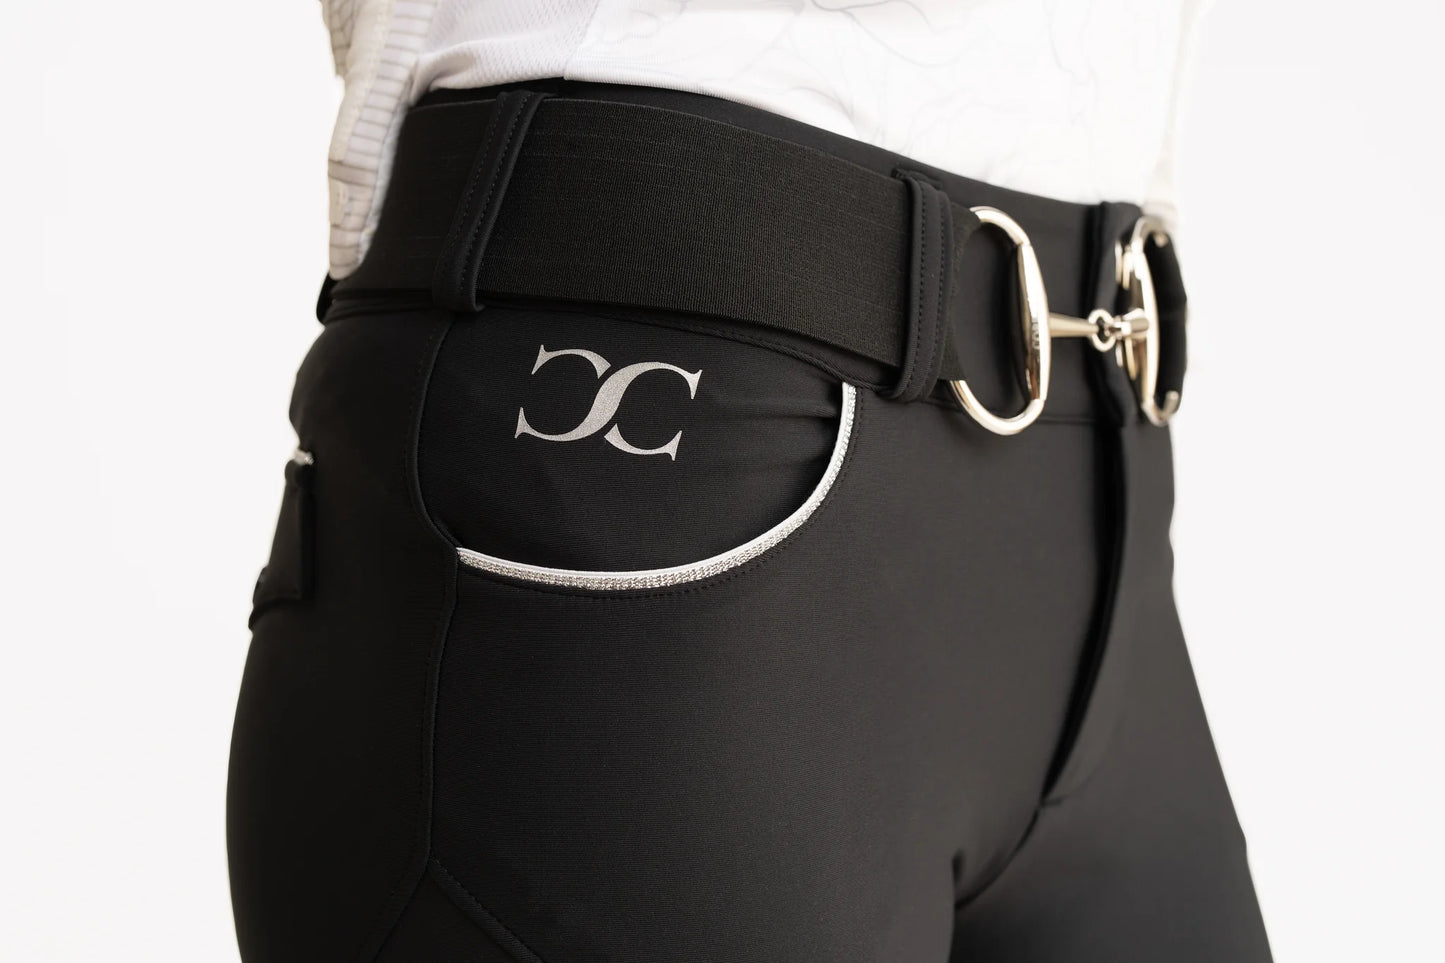 Correct Connect Black Breeches with Suede Seat